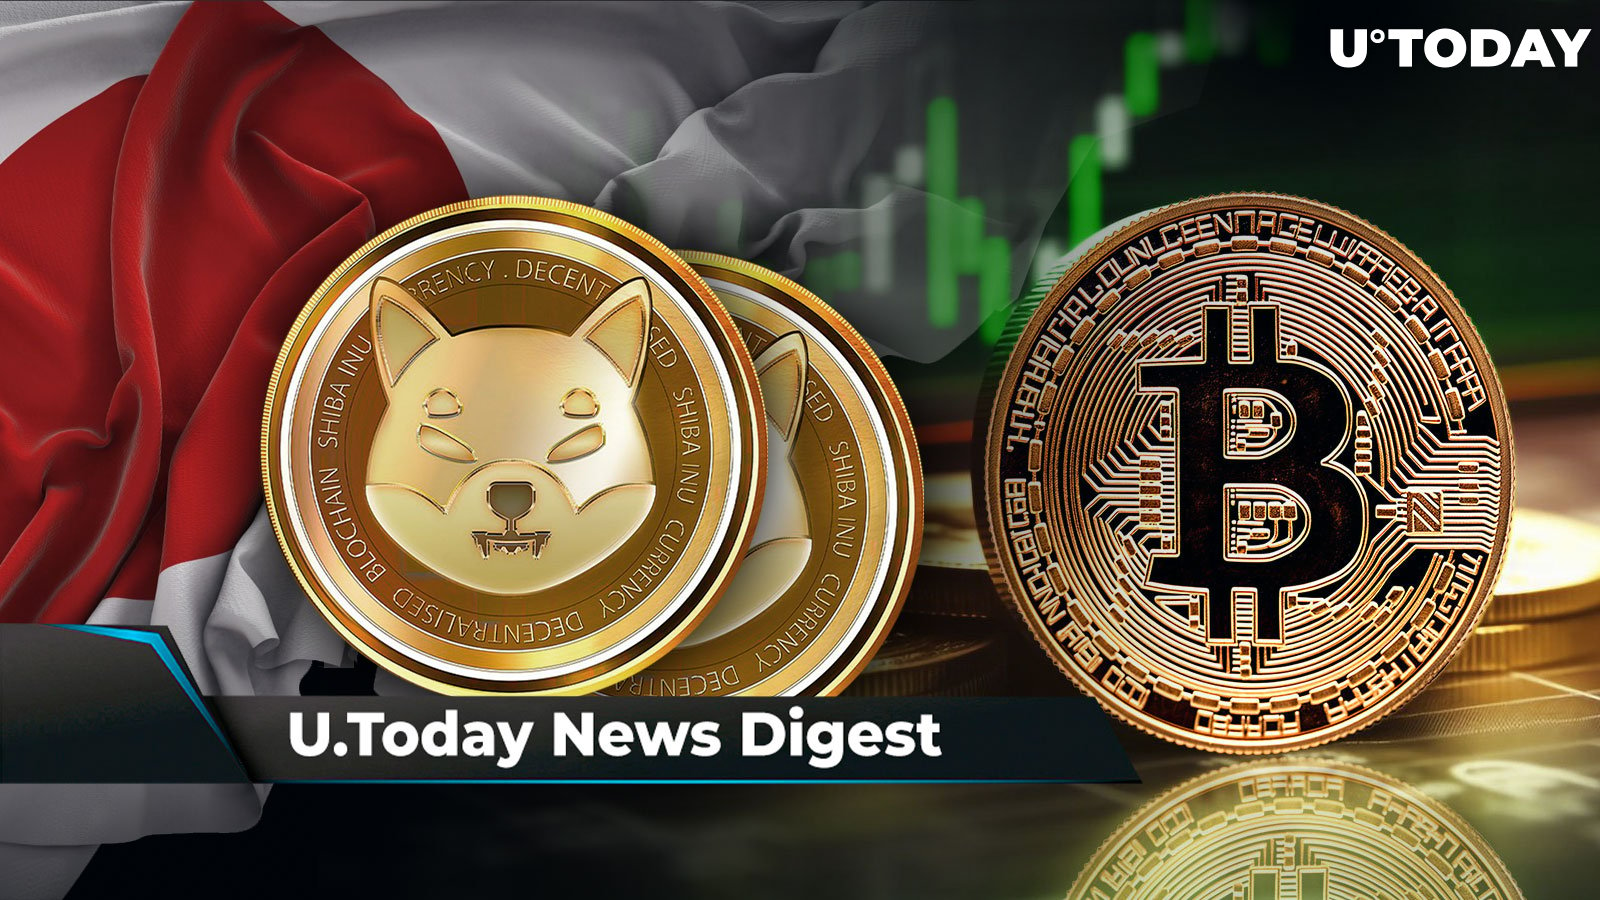 Major Japanese Exchange Adds Support for SHIB, BTC Predicted to Surge to $80,000 in 2024, Ripple's New Campaign Emerges in London Underground: Crypto News Digest by U.Today